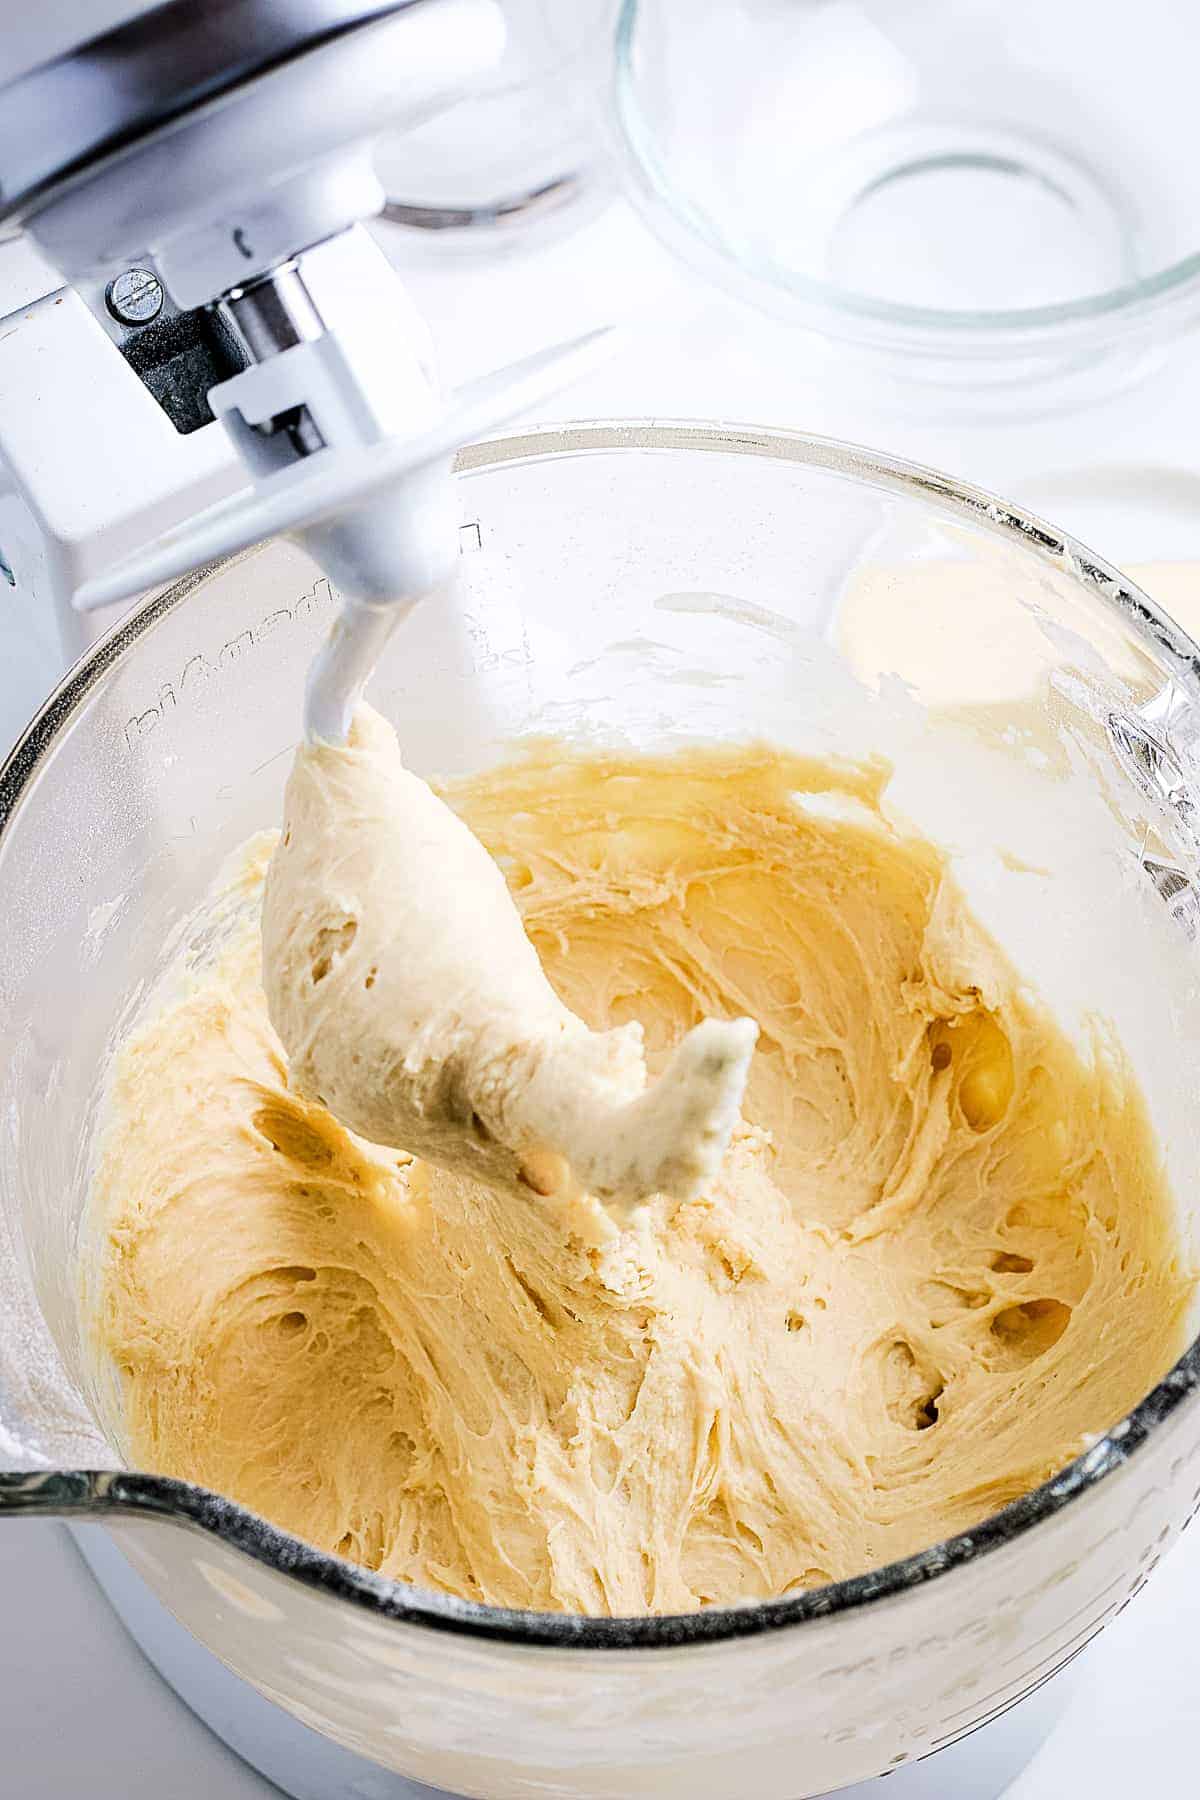 Dough mixed together by a stand mixer with hook